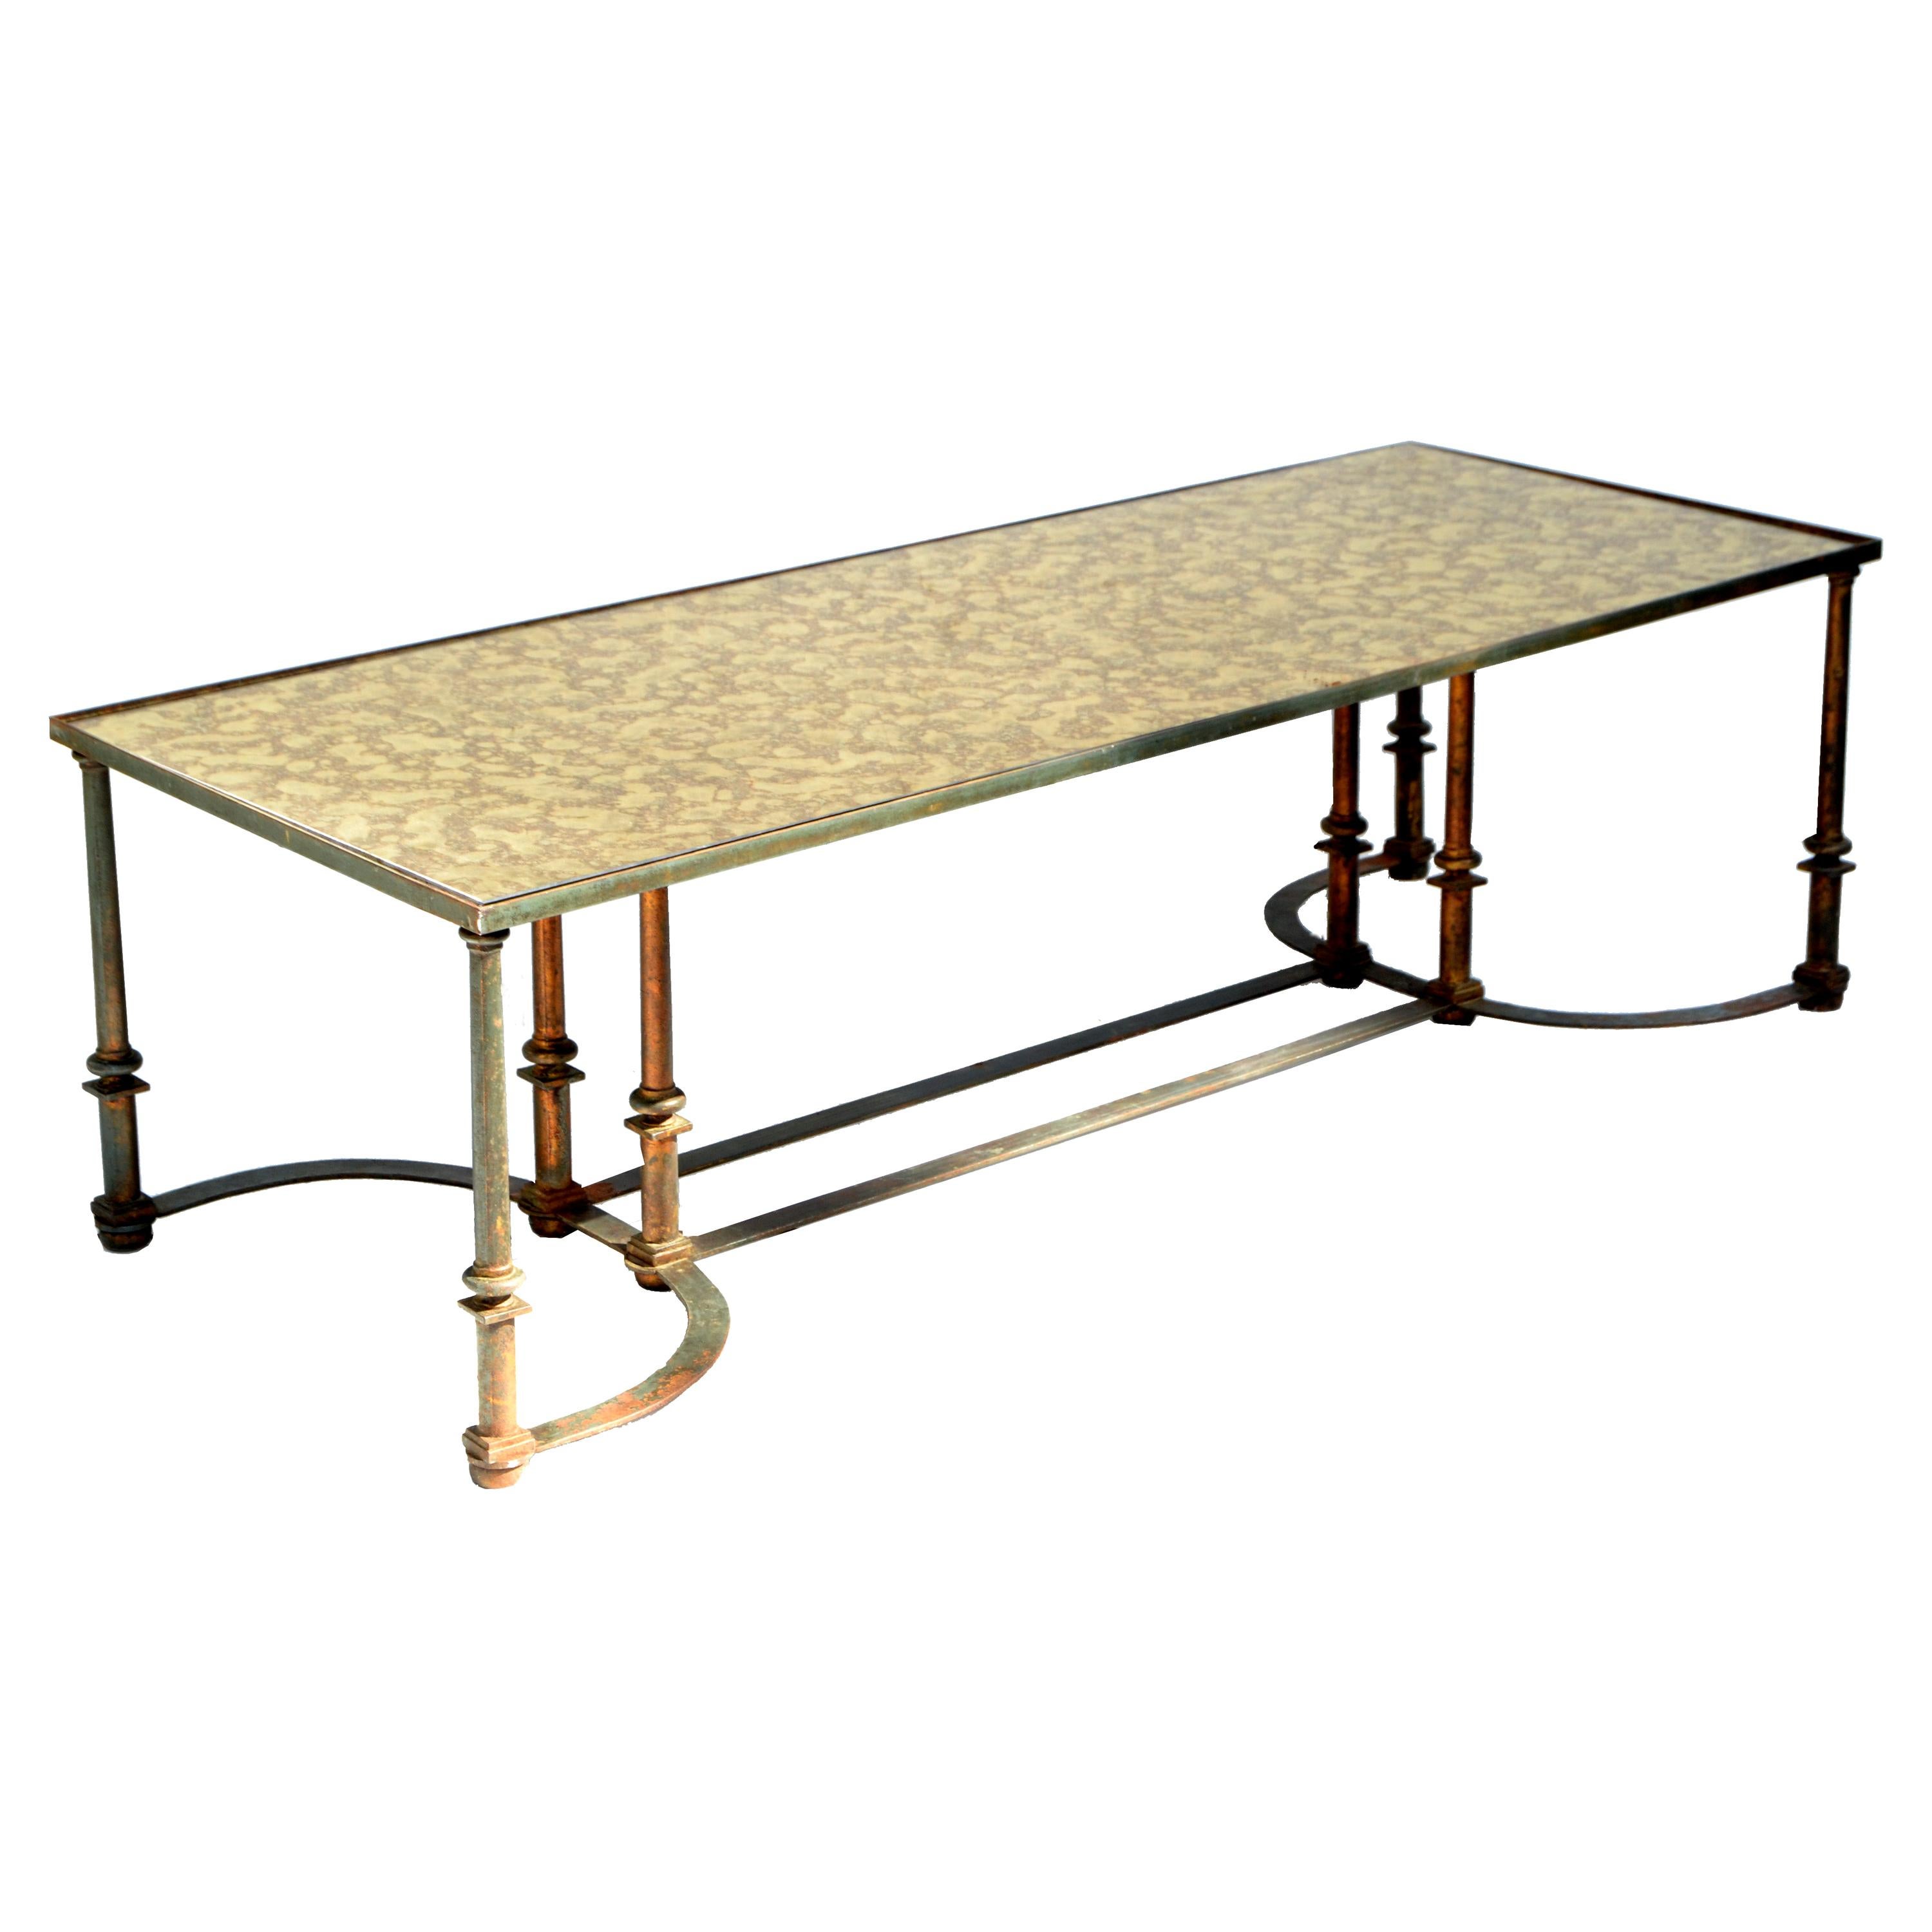 Maison Jansen Neoclassical Distressed Steel Coffee Table Cloudy Mirror Glass